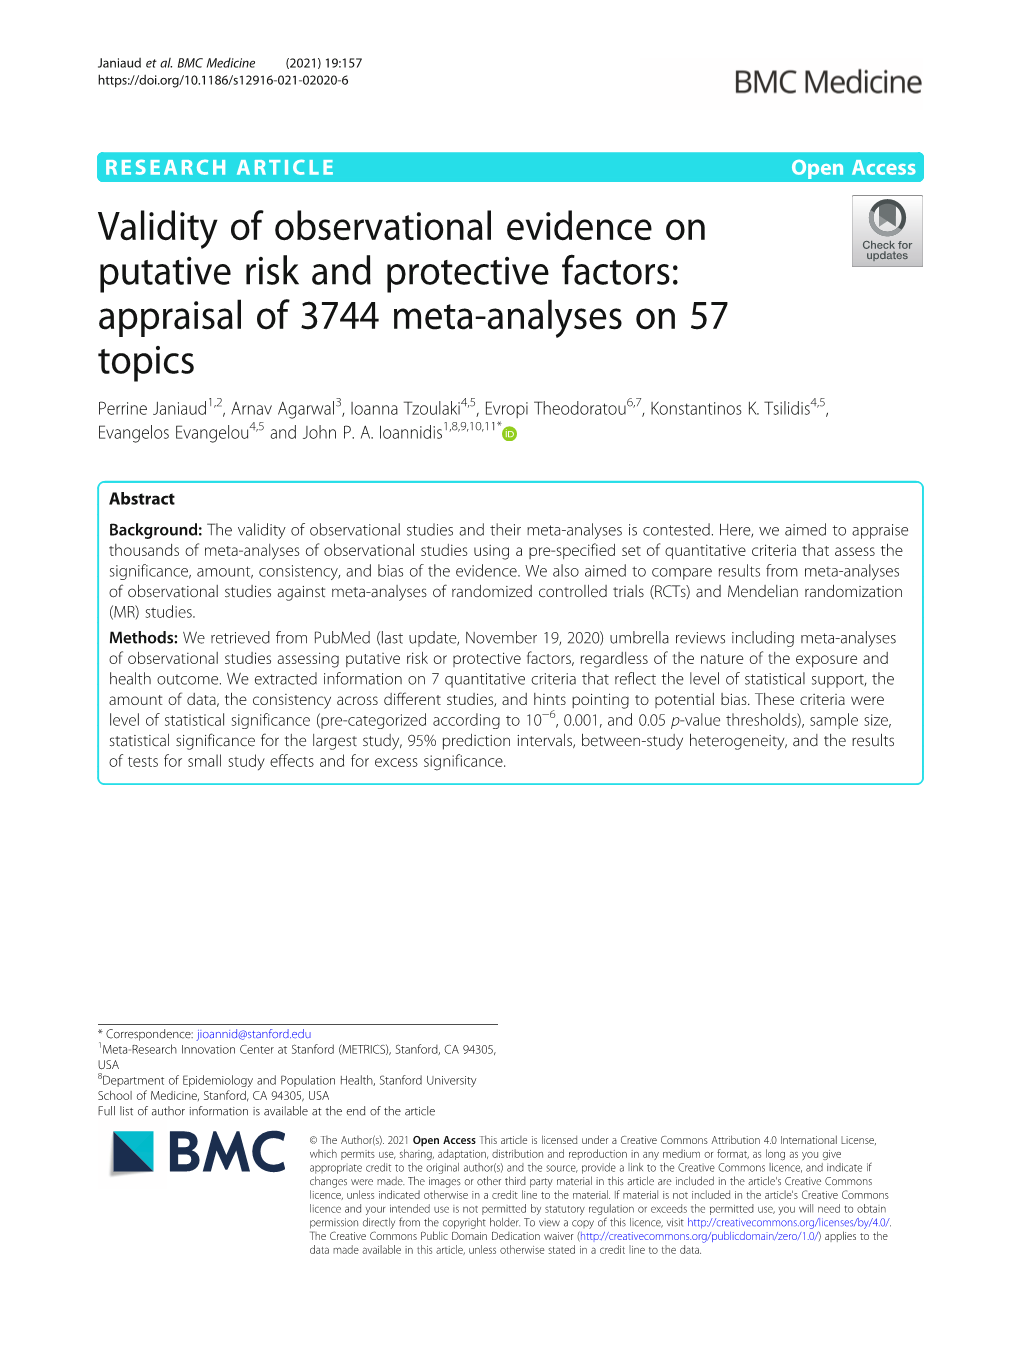 Validity of Observational Evidence on Putative Risk and Protective Factors